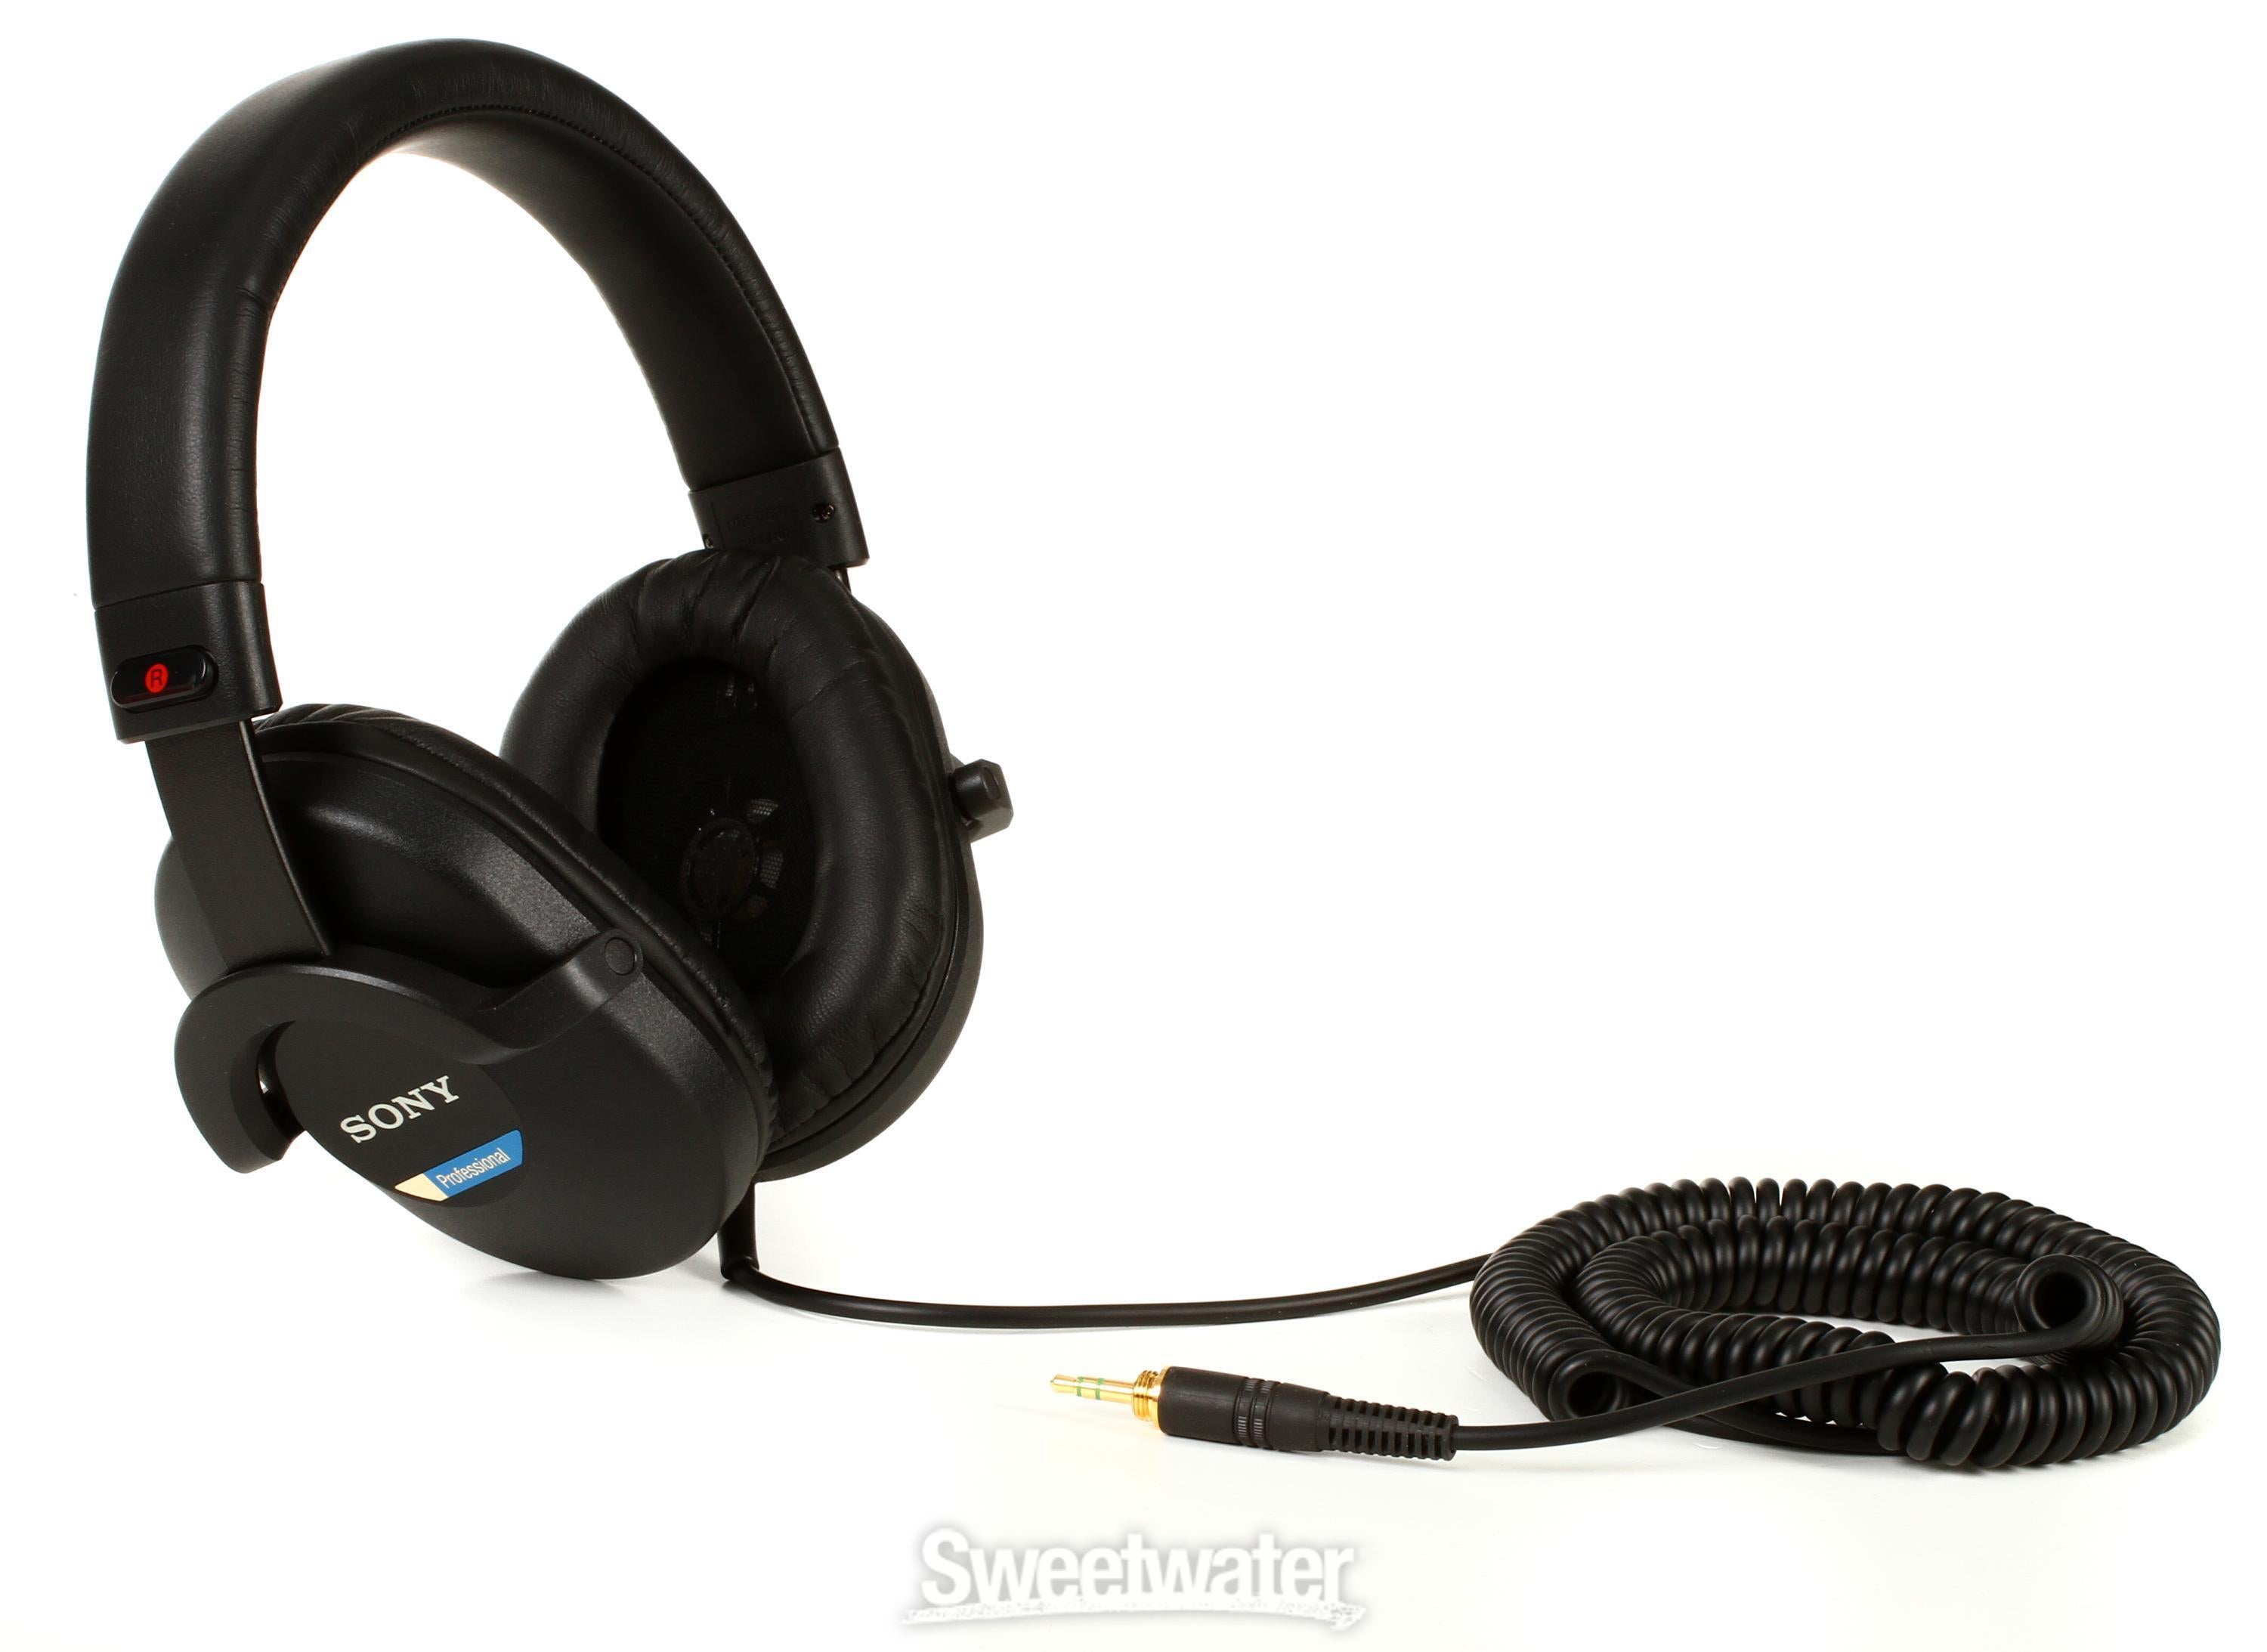 Sony MDR-7510 Closed-back Studio Headphones Reviews | Sweetwater